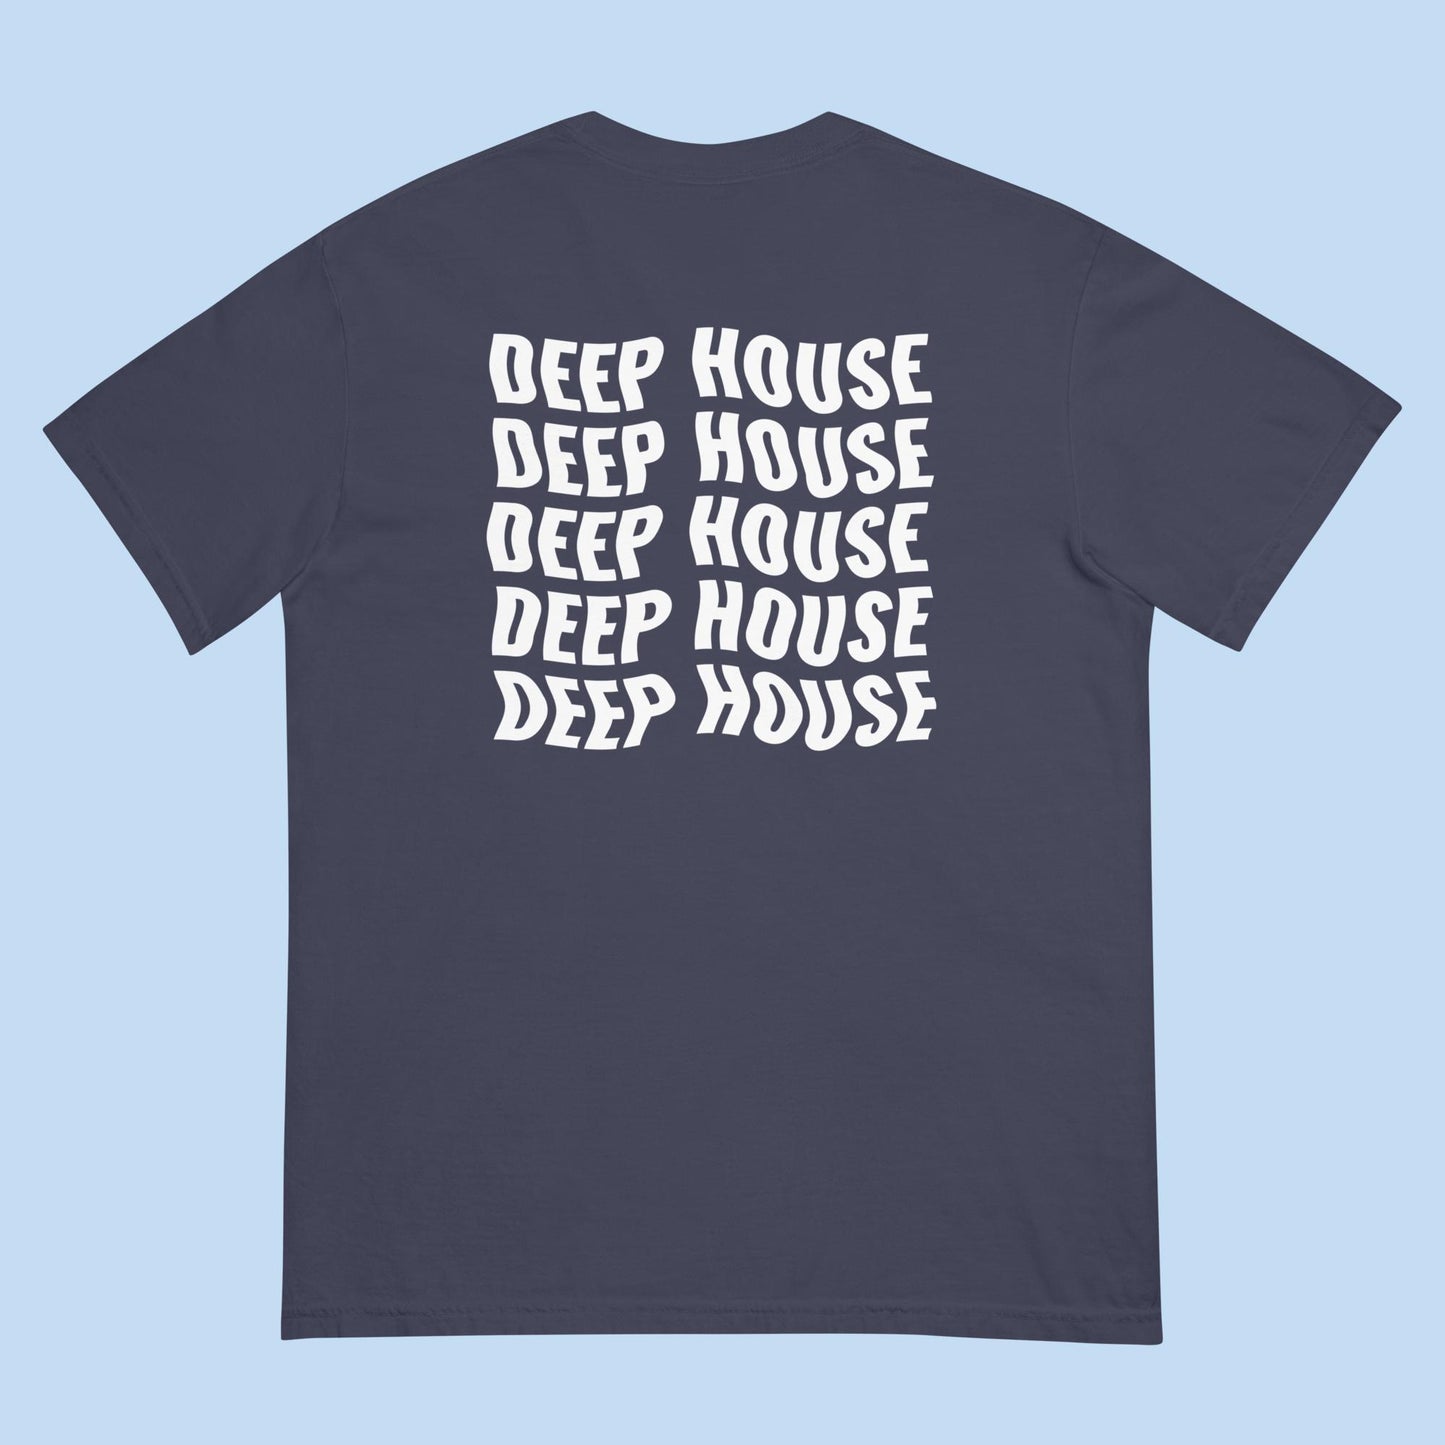 Deep House - White Embroidery Unisex Garment-Dyed Heavyweight T-shirt